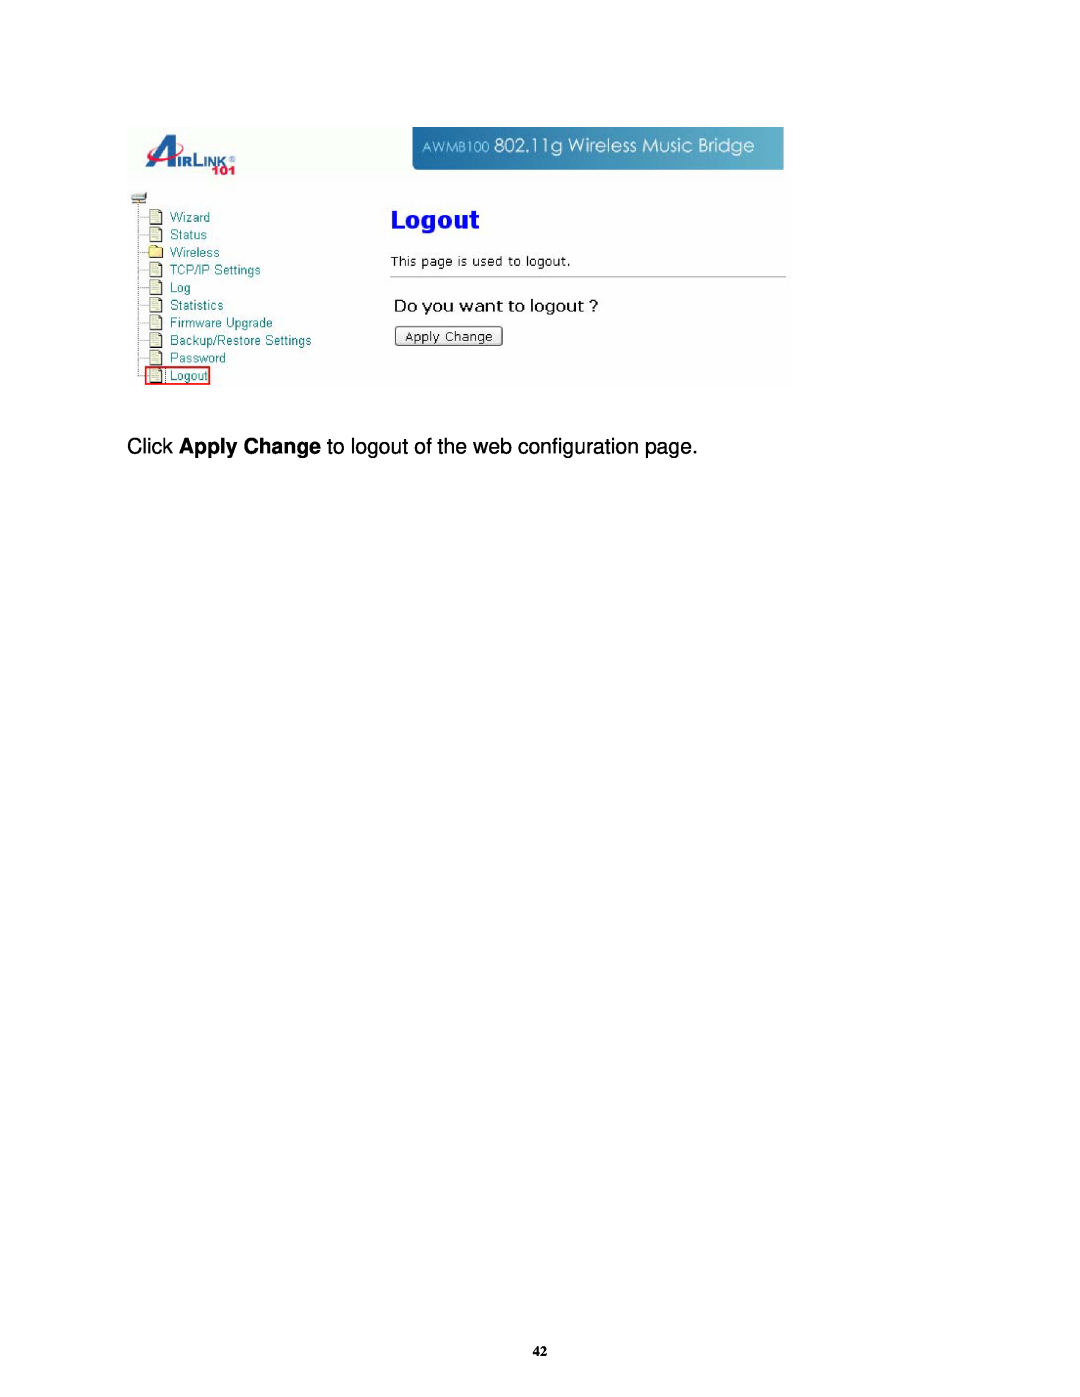 Airlink101 AWMB100 manual Click Apply Change to logout of the web configuration page 